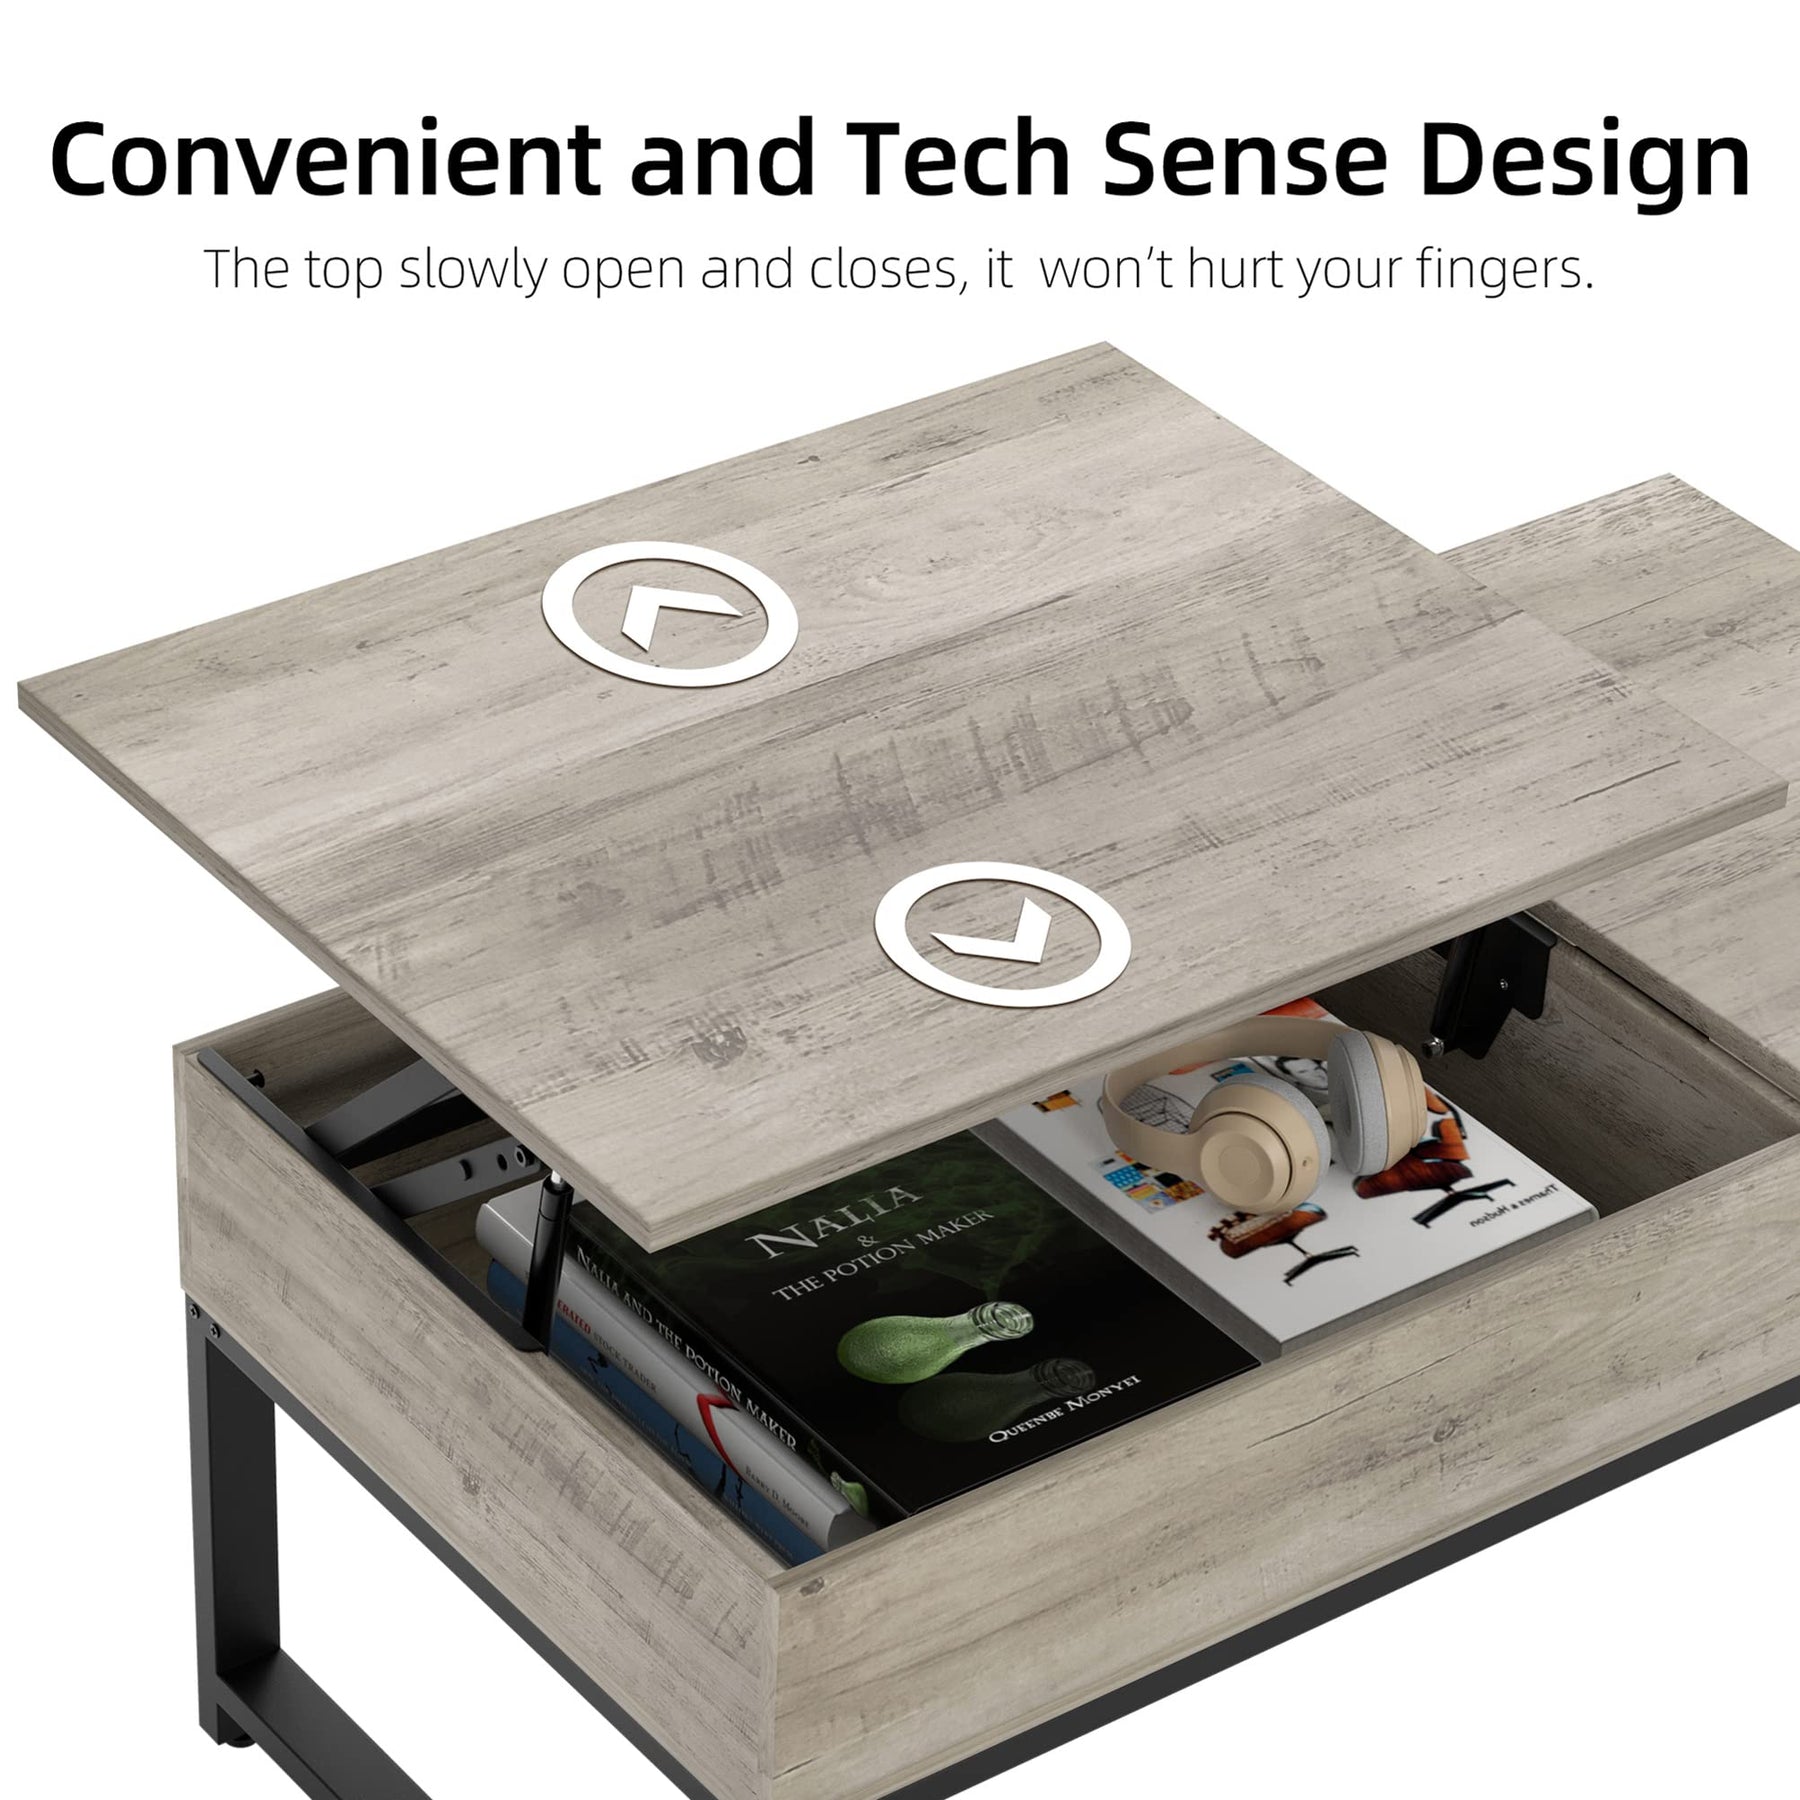 IDEALHOUSE Lift Top Coffee Table with Hidden Storage - Grey